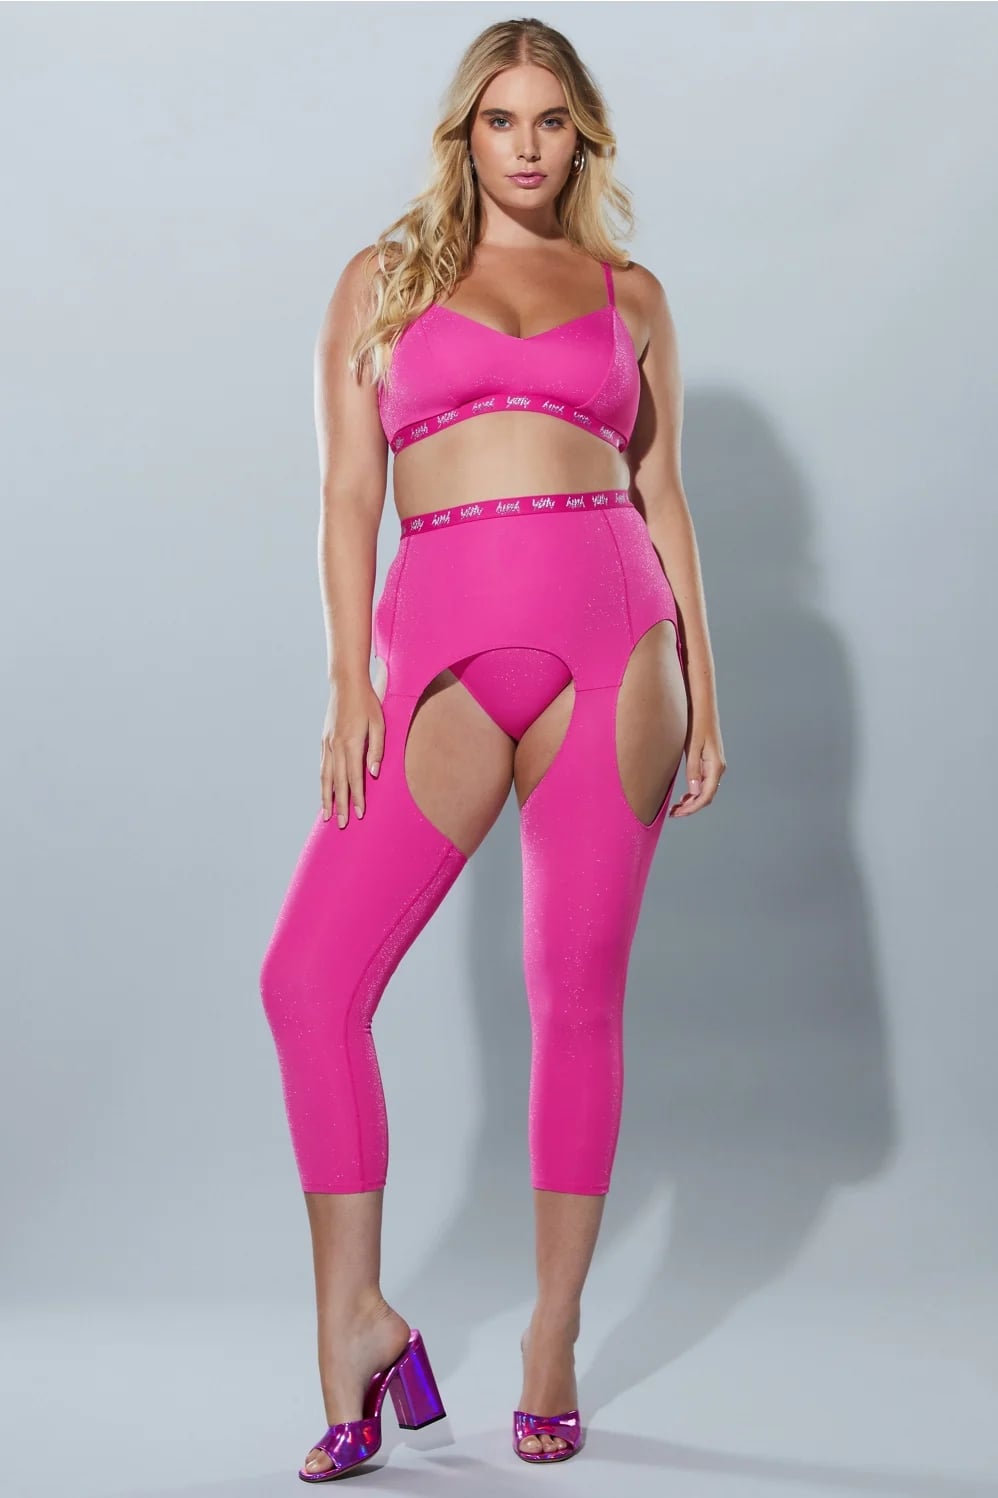 Shop Lizzo's Yitty Look, Lizzo Dances in Bum-Cutout Leggings and a  Matching Pink Bra